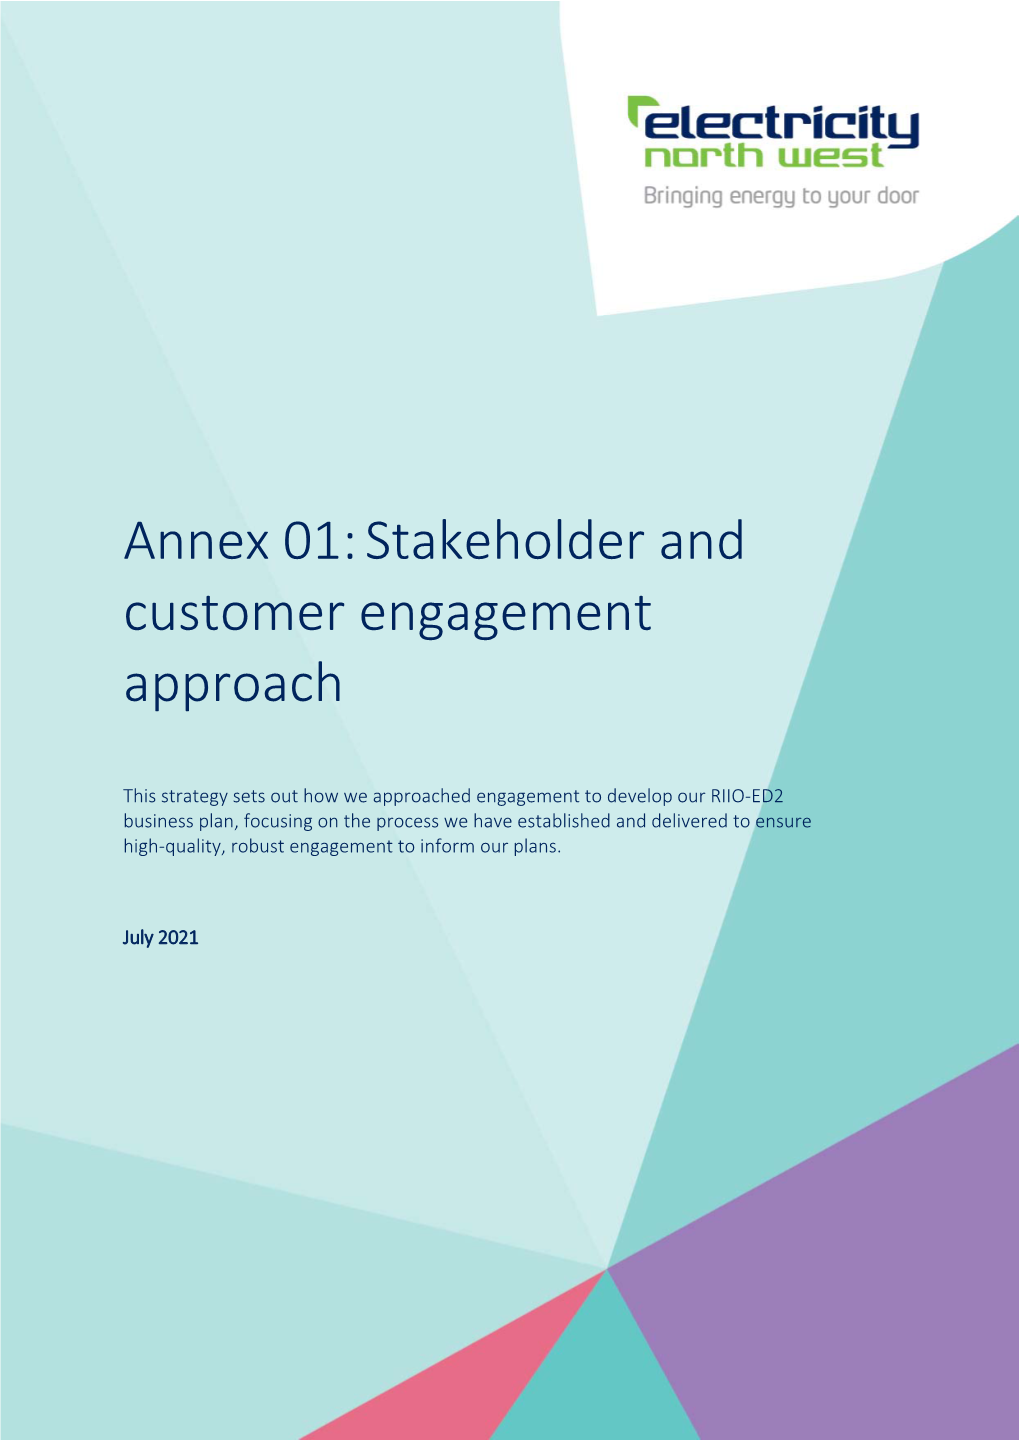 Annex 01: Stakeholder and Customer Engagement Approach